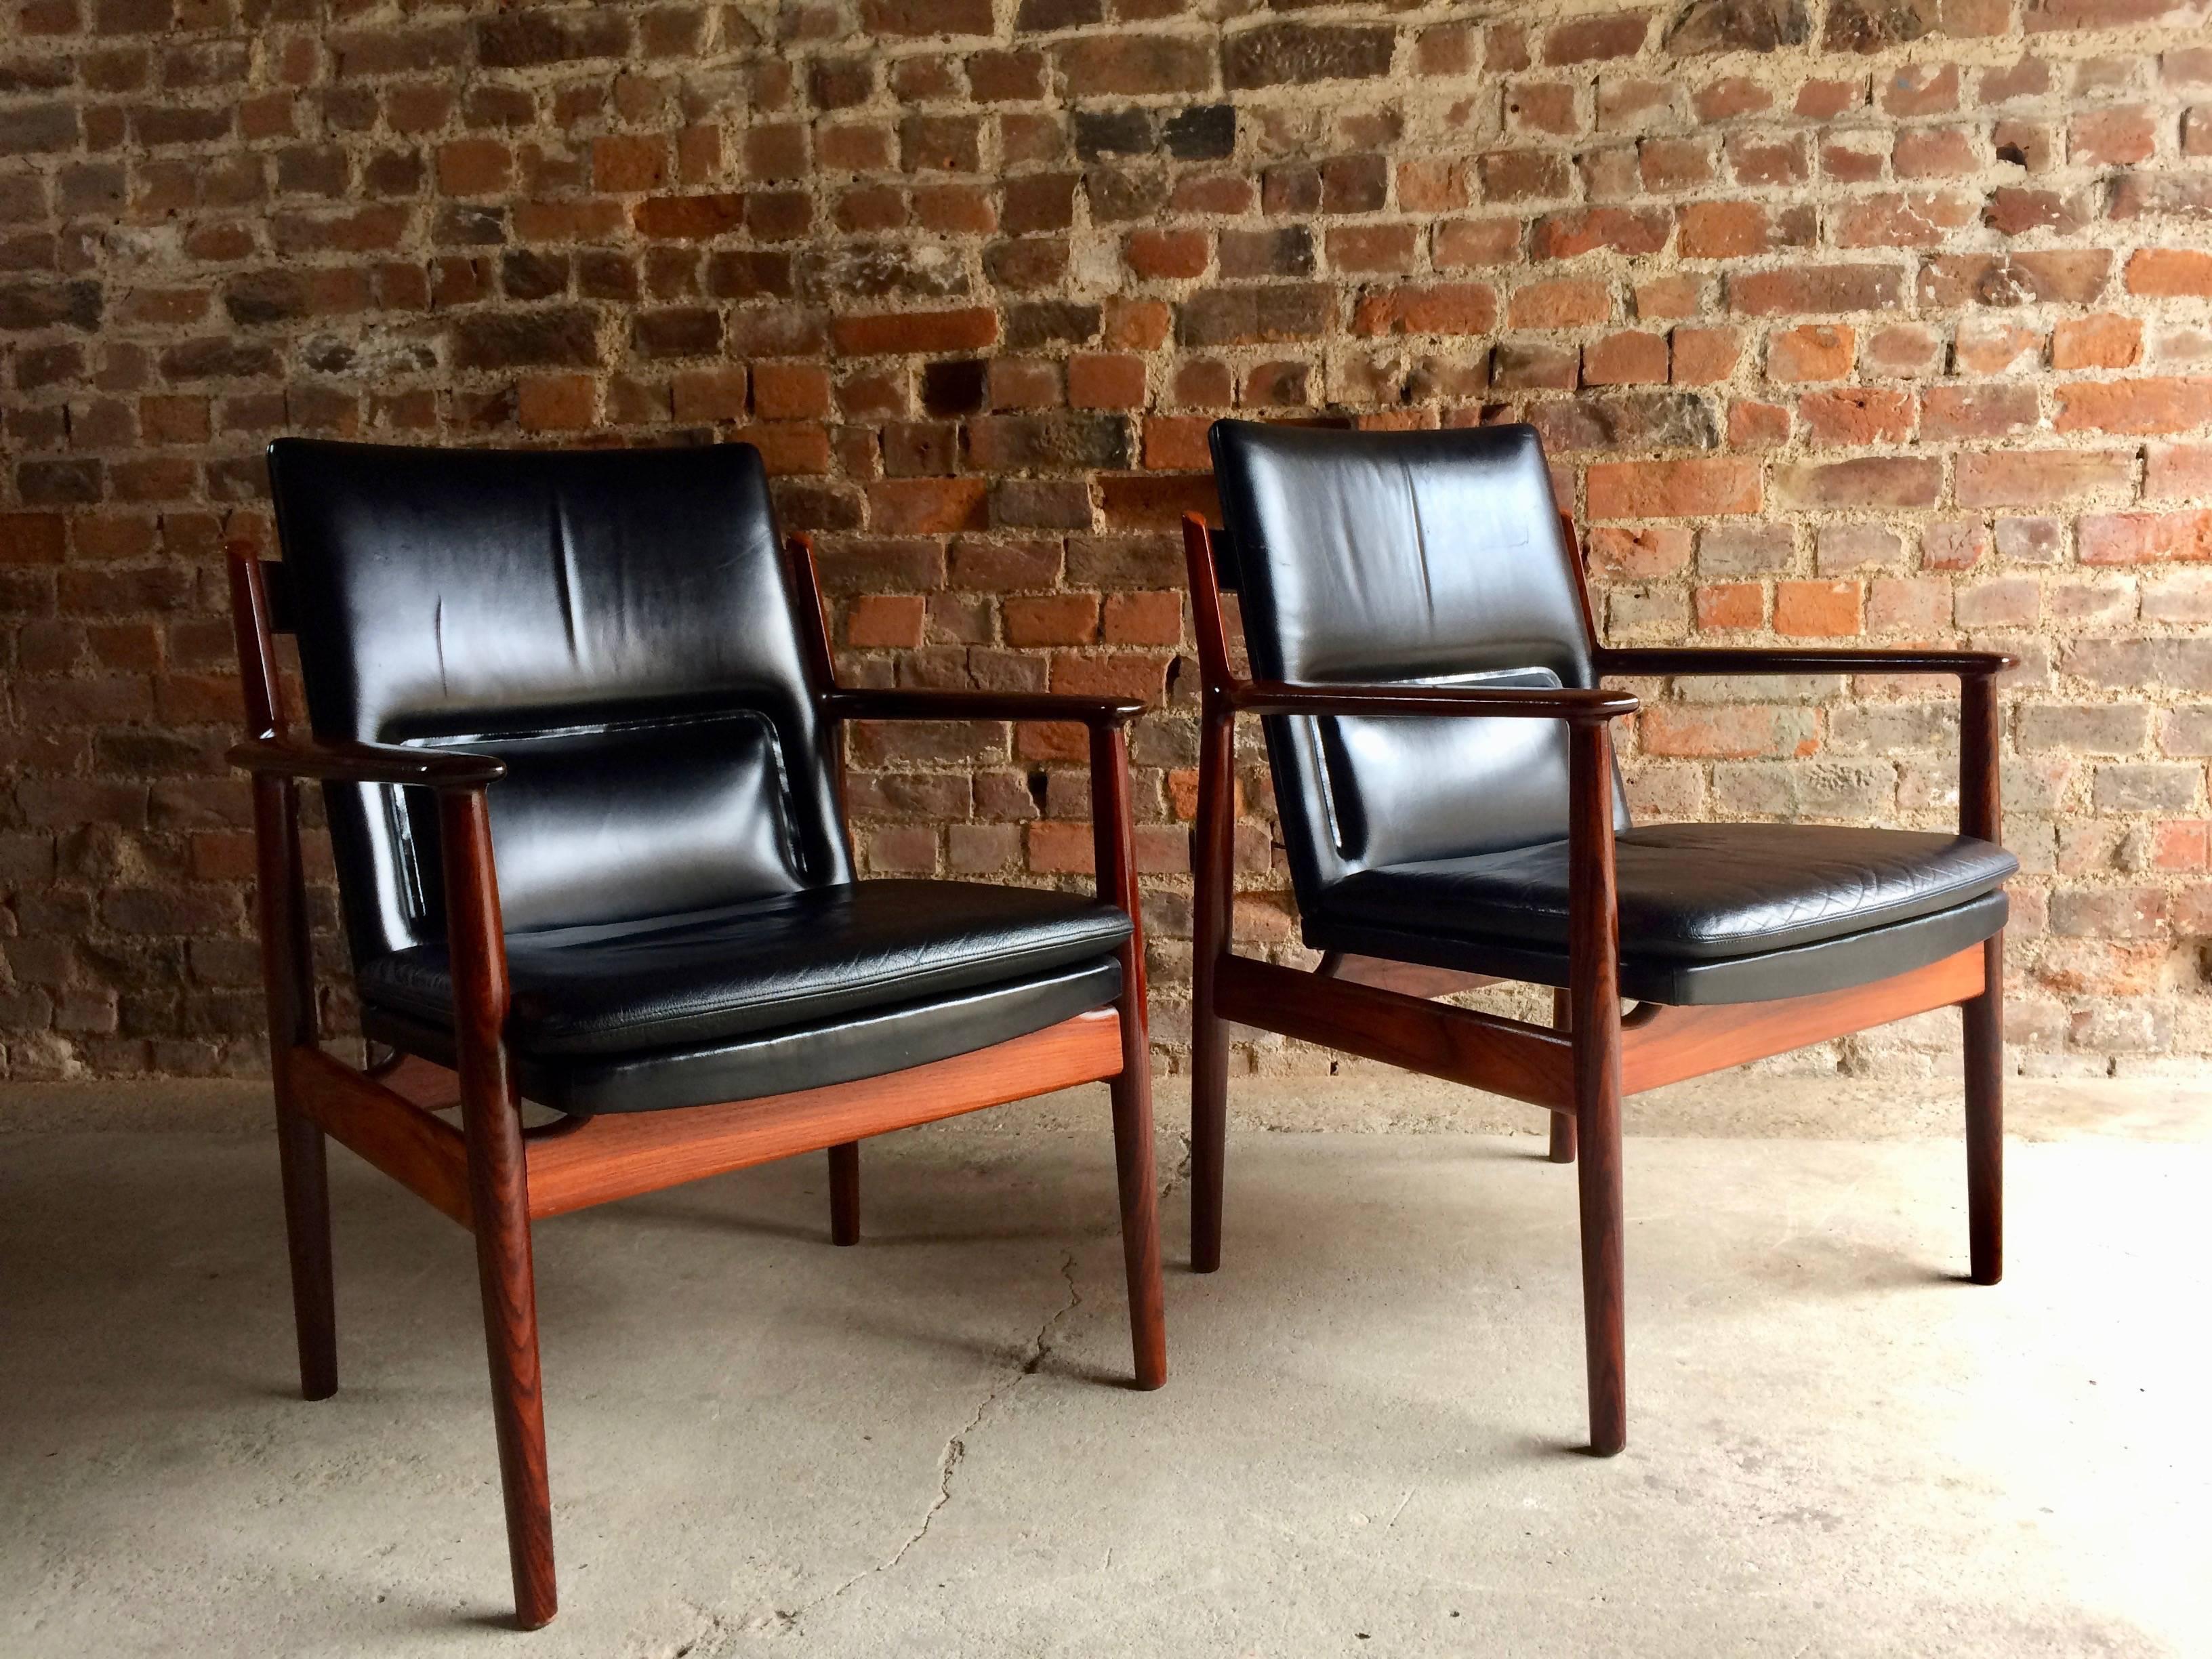 Magnificent pair of Arne Vodder model 431 black leather and solid rosewood armchairs manufactured by Sibast Furniture, circa 1965, with solid rosewood frames and black leather upholstery, makers label to underside of each chair.

Note: Sold in